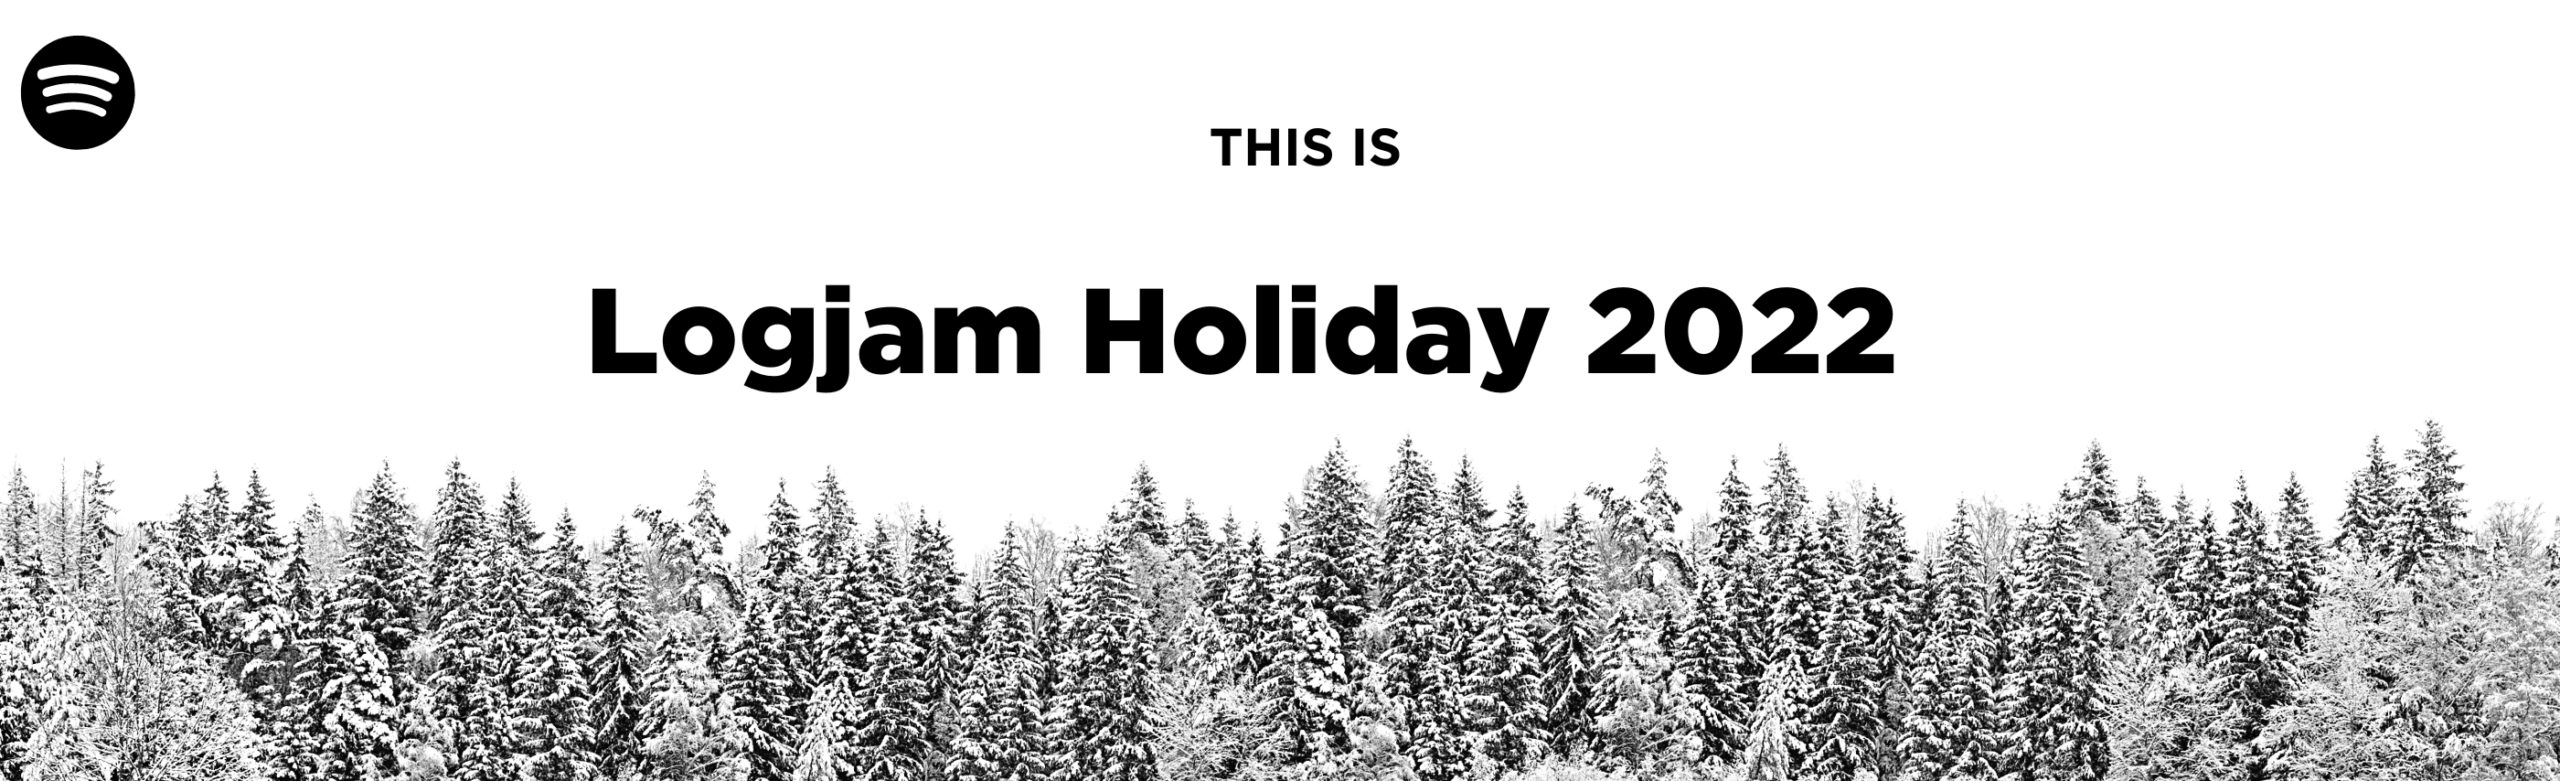 Logjam Radio: Happy Holiday’s 2022 and Cheers to the New Year! Image